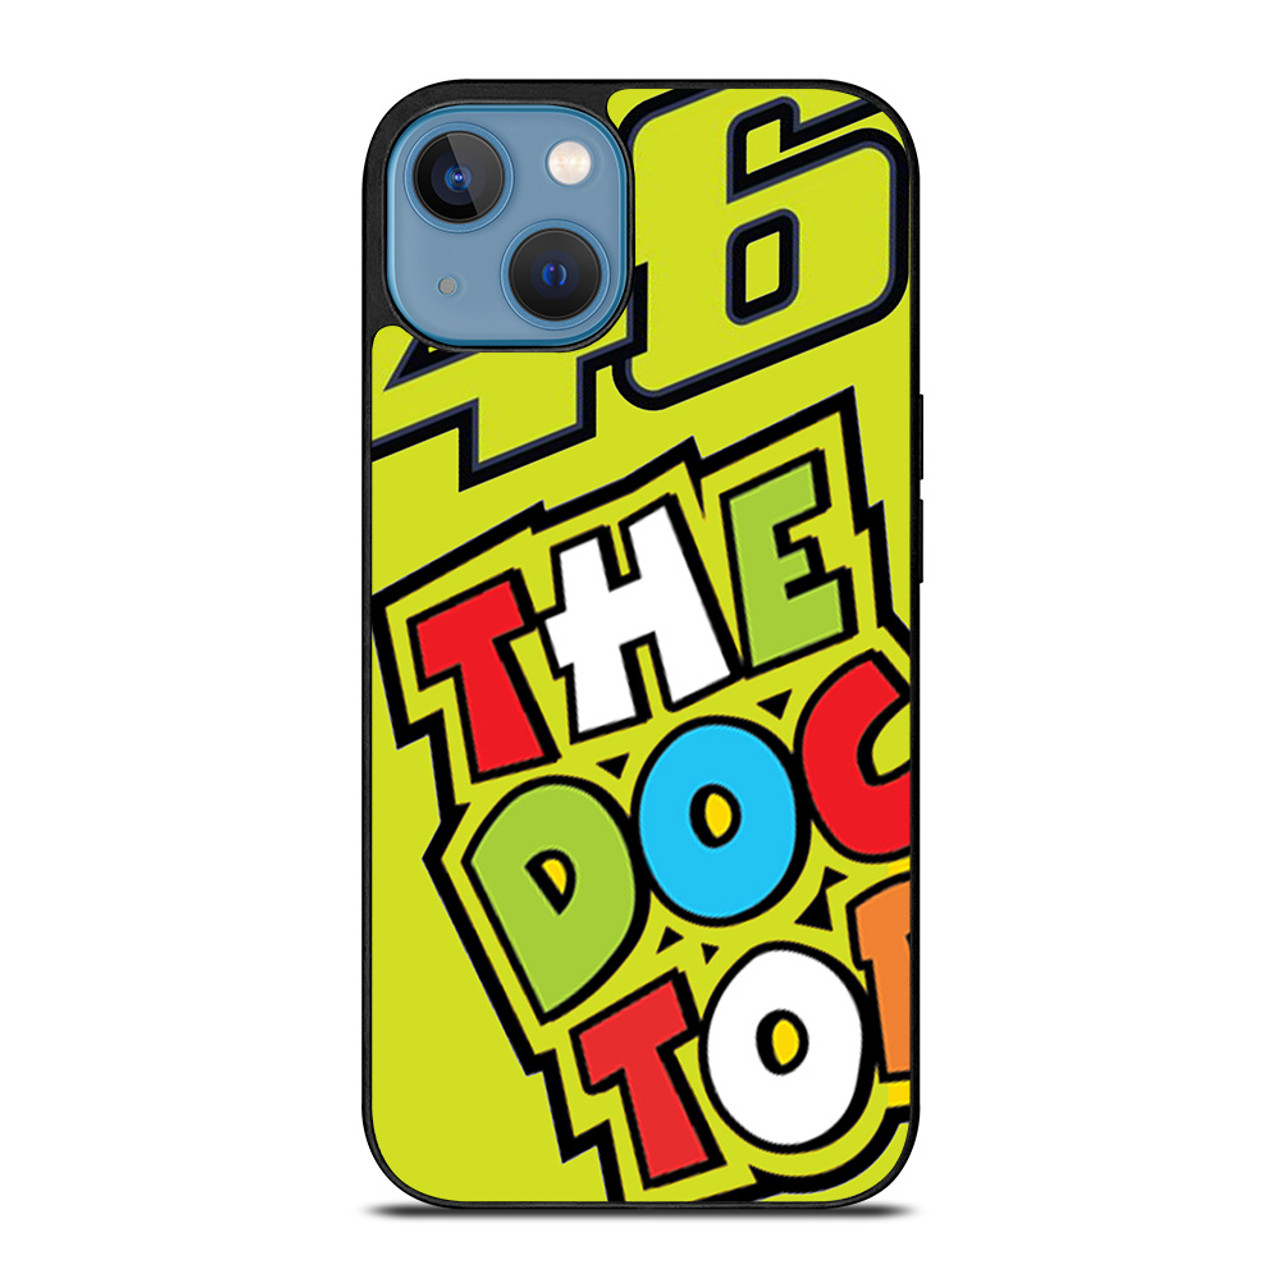 valentino rossi the doctor font